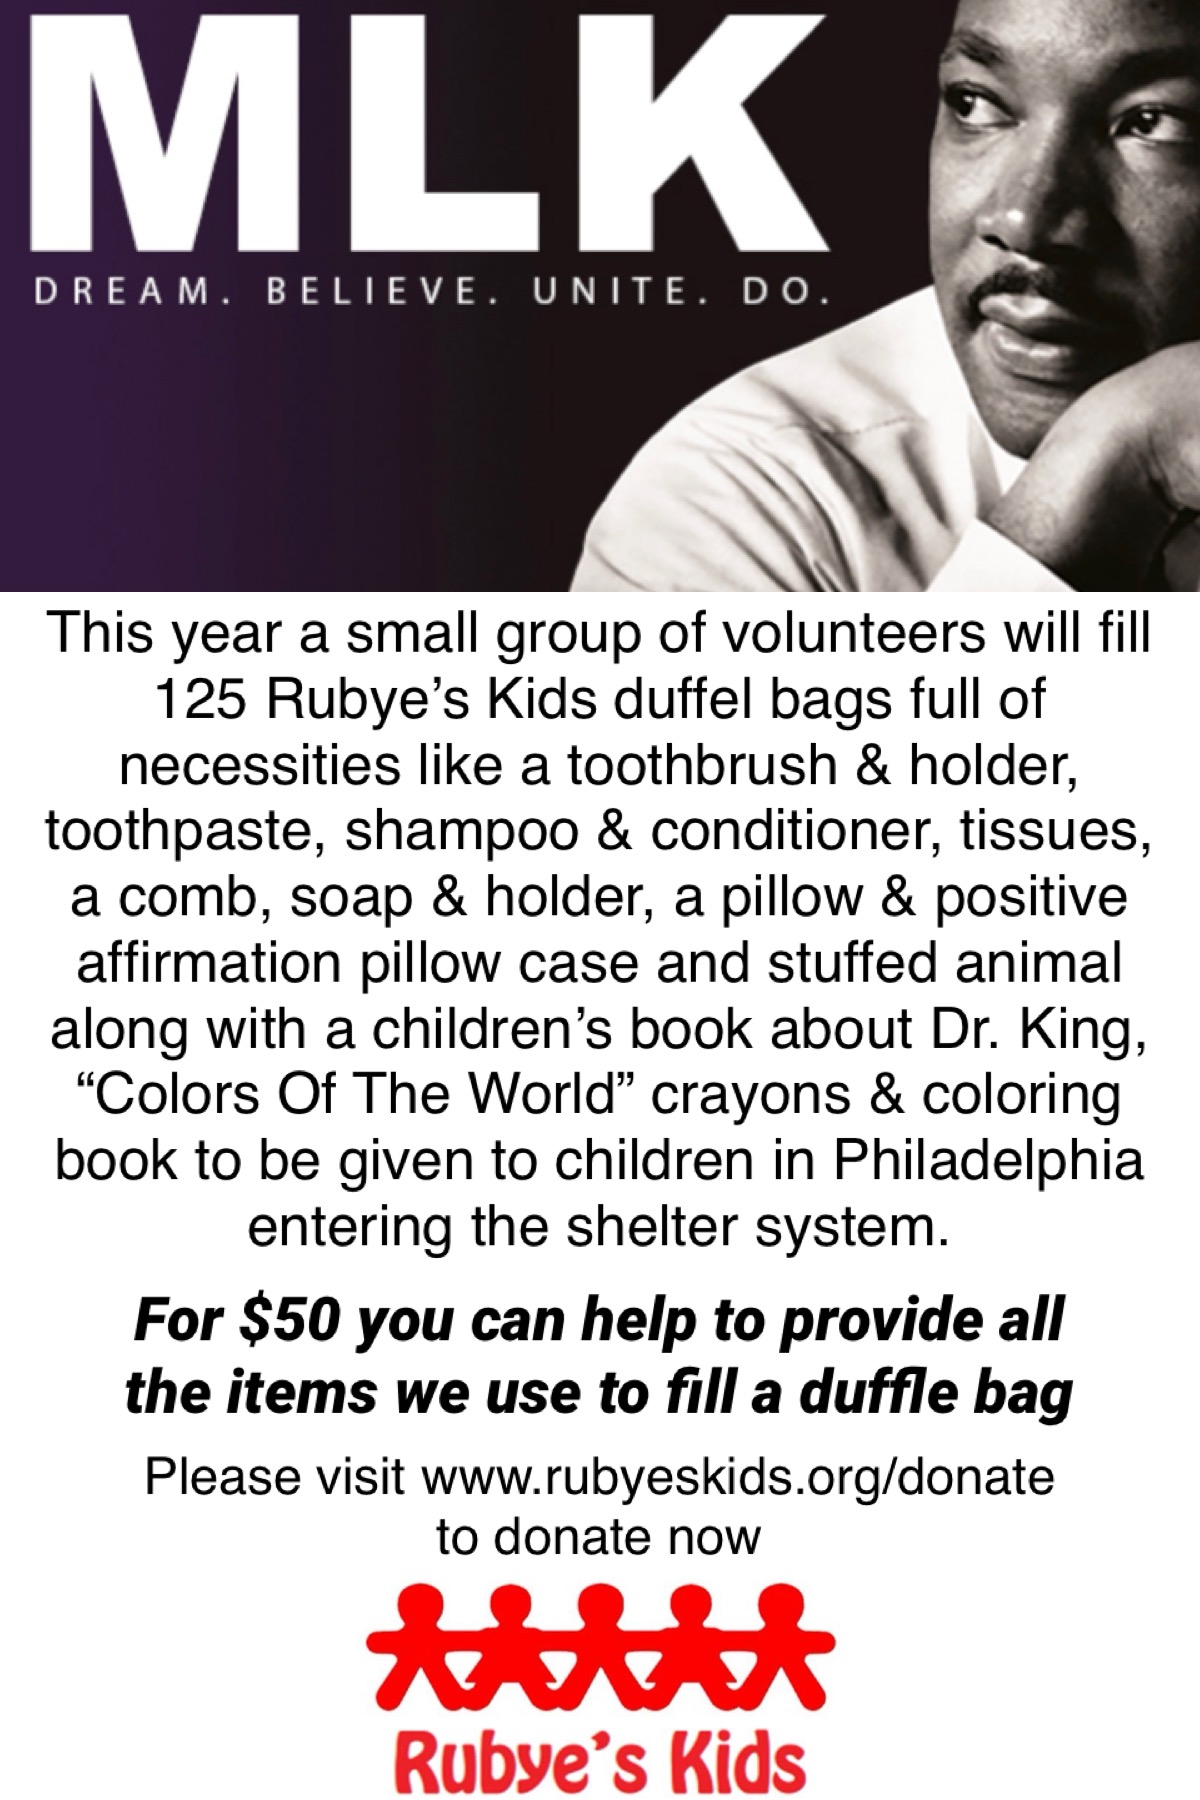 This year a small group of volunteers will fill 125 Rubye's Kids duffel bags full of necessities like a toothbrush & holder, toothpaste, shampoo & conditioner, tissues, a comb, soap & holder, a pillow & positive affirmation pillow case and stuffed animal along with a children's book about Dr. King,
"Colors Of The World" crayons & coloring book to be given to children in Philadelphia entering the shelter system.